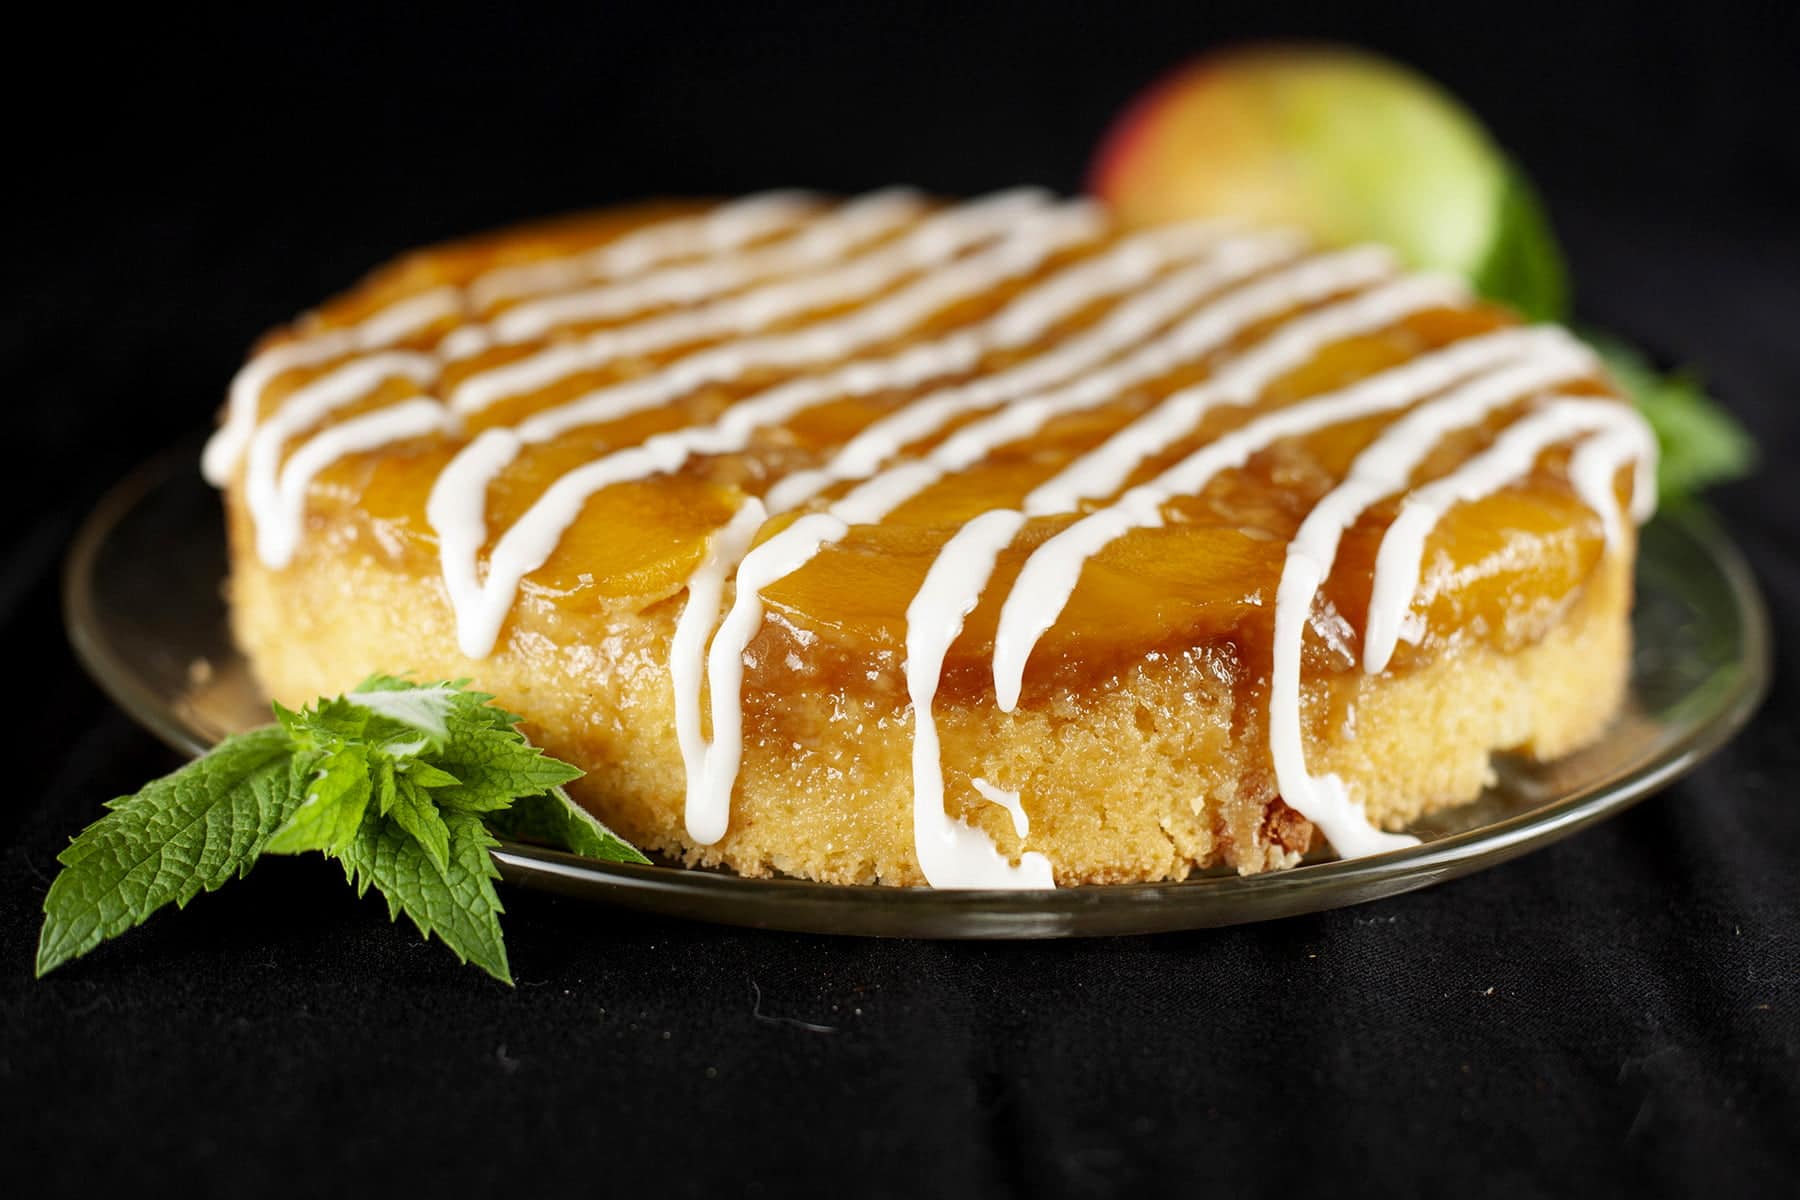 A mango mojito upside down cake: a large round single layer mango upside down cake, on a glass plate. It has a white icing drizzled over it, and has a sprig of fresh mint on the side of the plate.